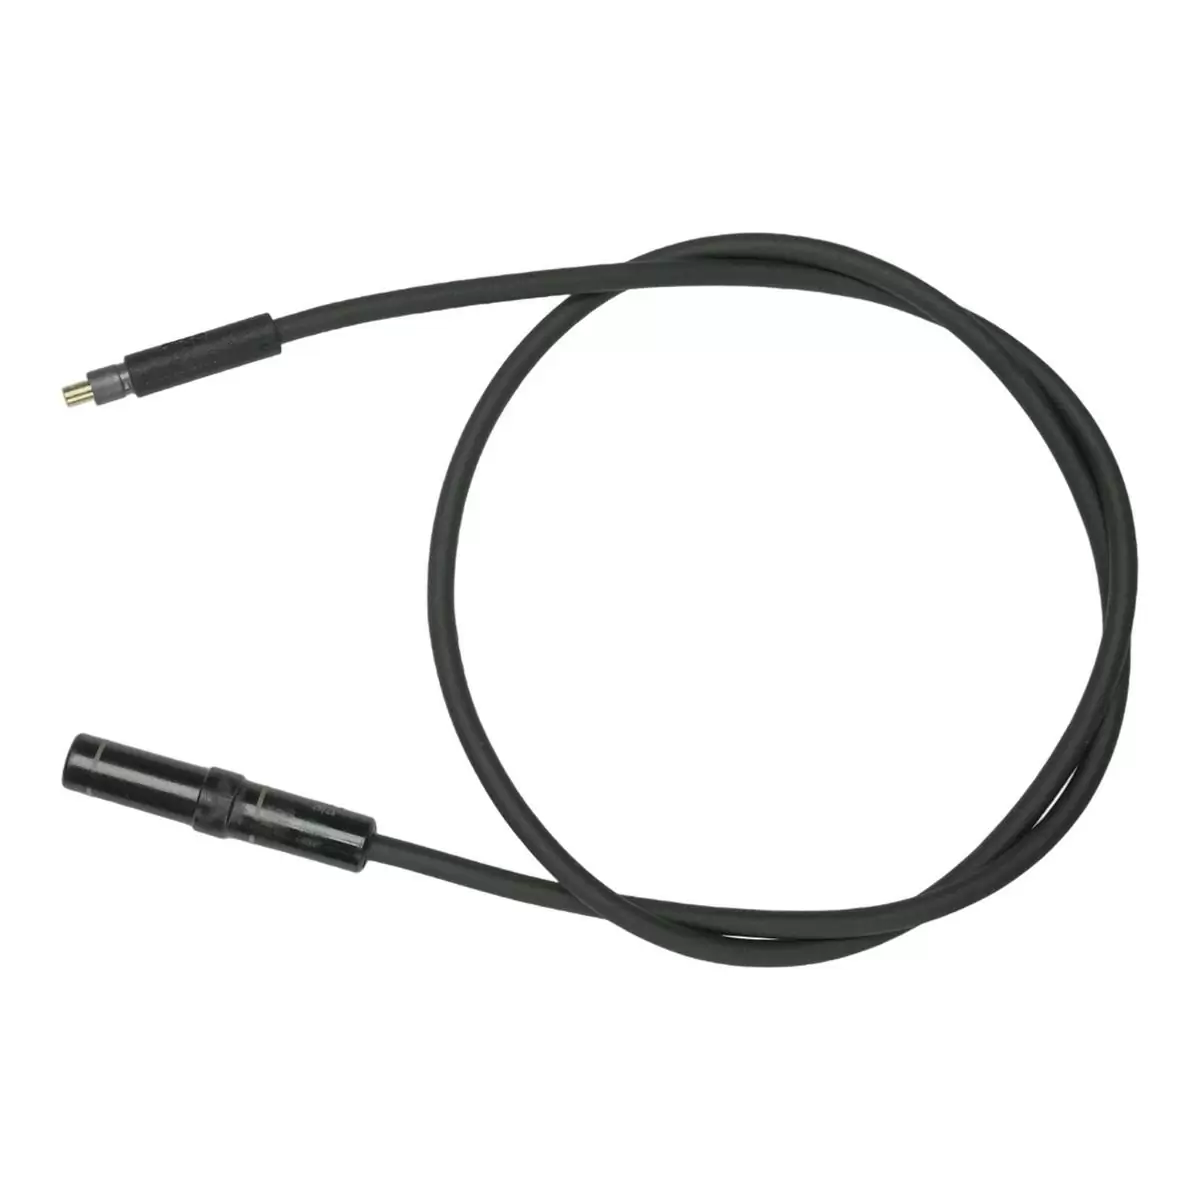 E-bike Speed Sensor Without Magnet For RIDE 60 460mm - image